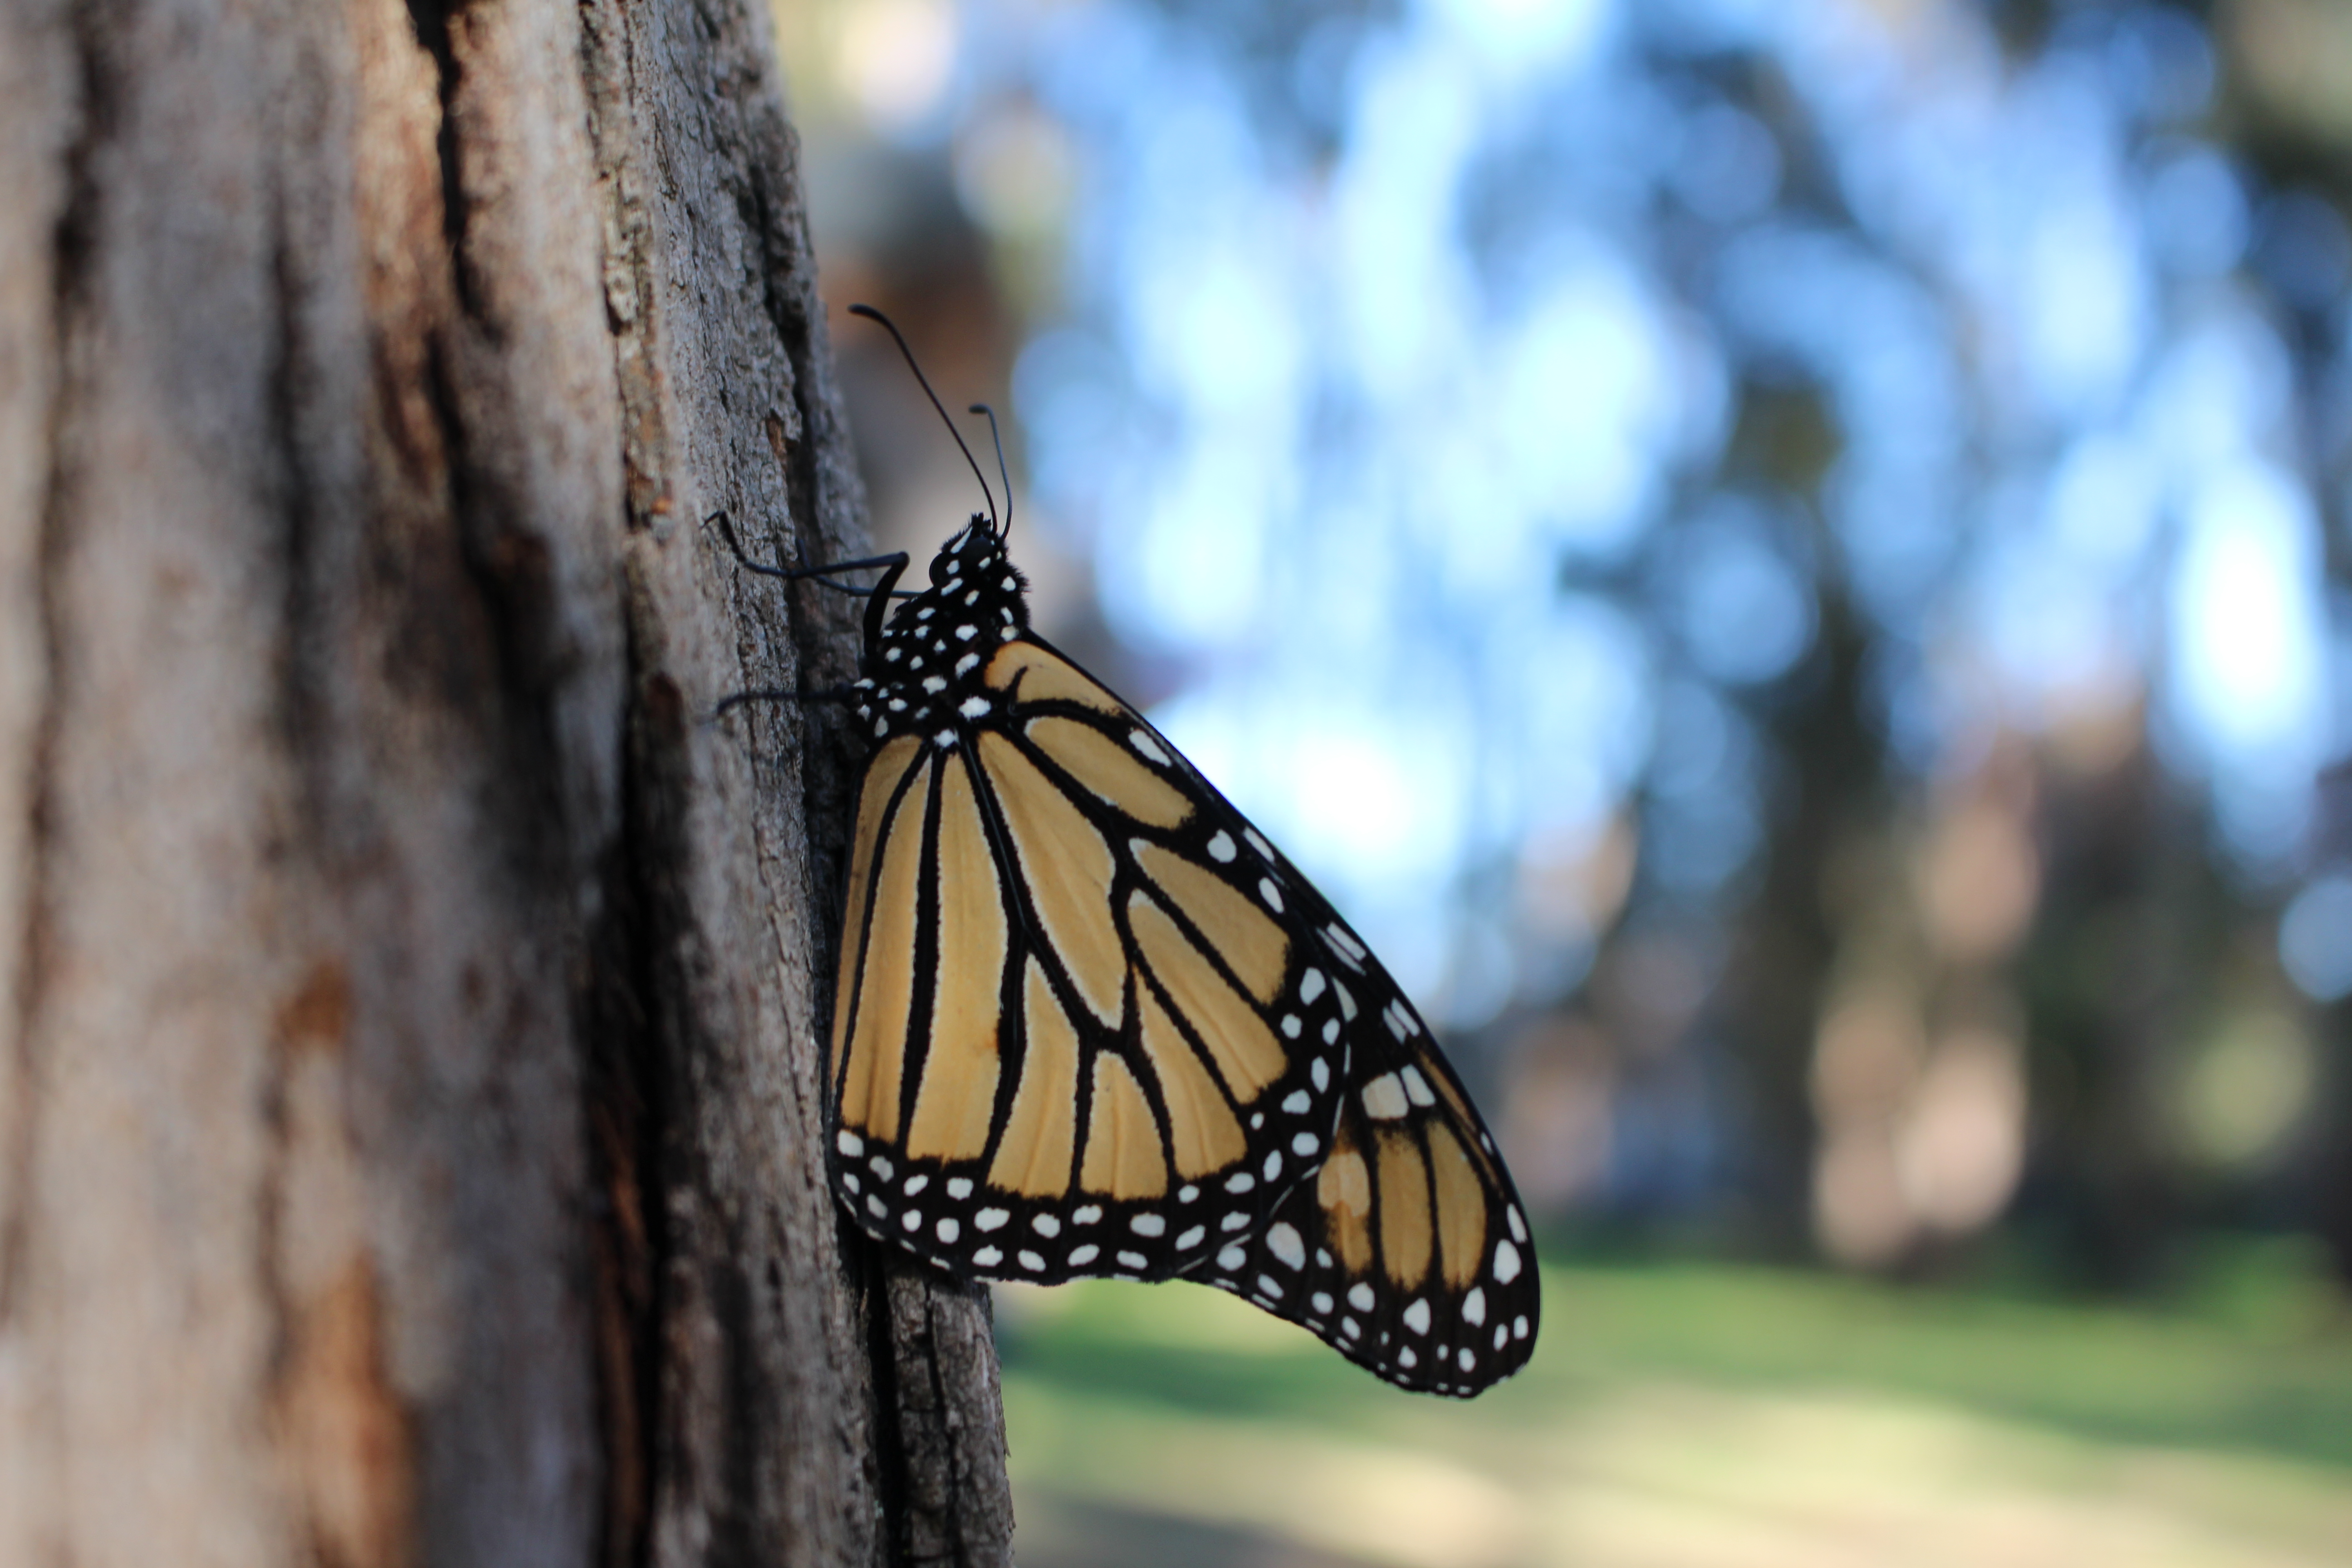 A monarch, with its wings folded, showing the duller orange side, clings to a rough tree trunk in a dimly-lit landscape.